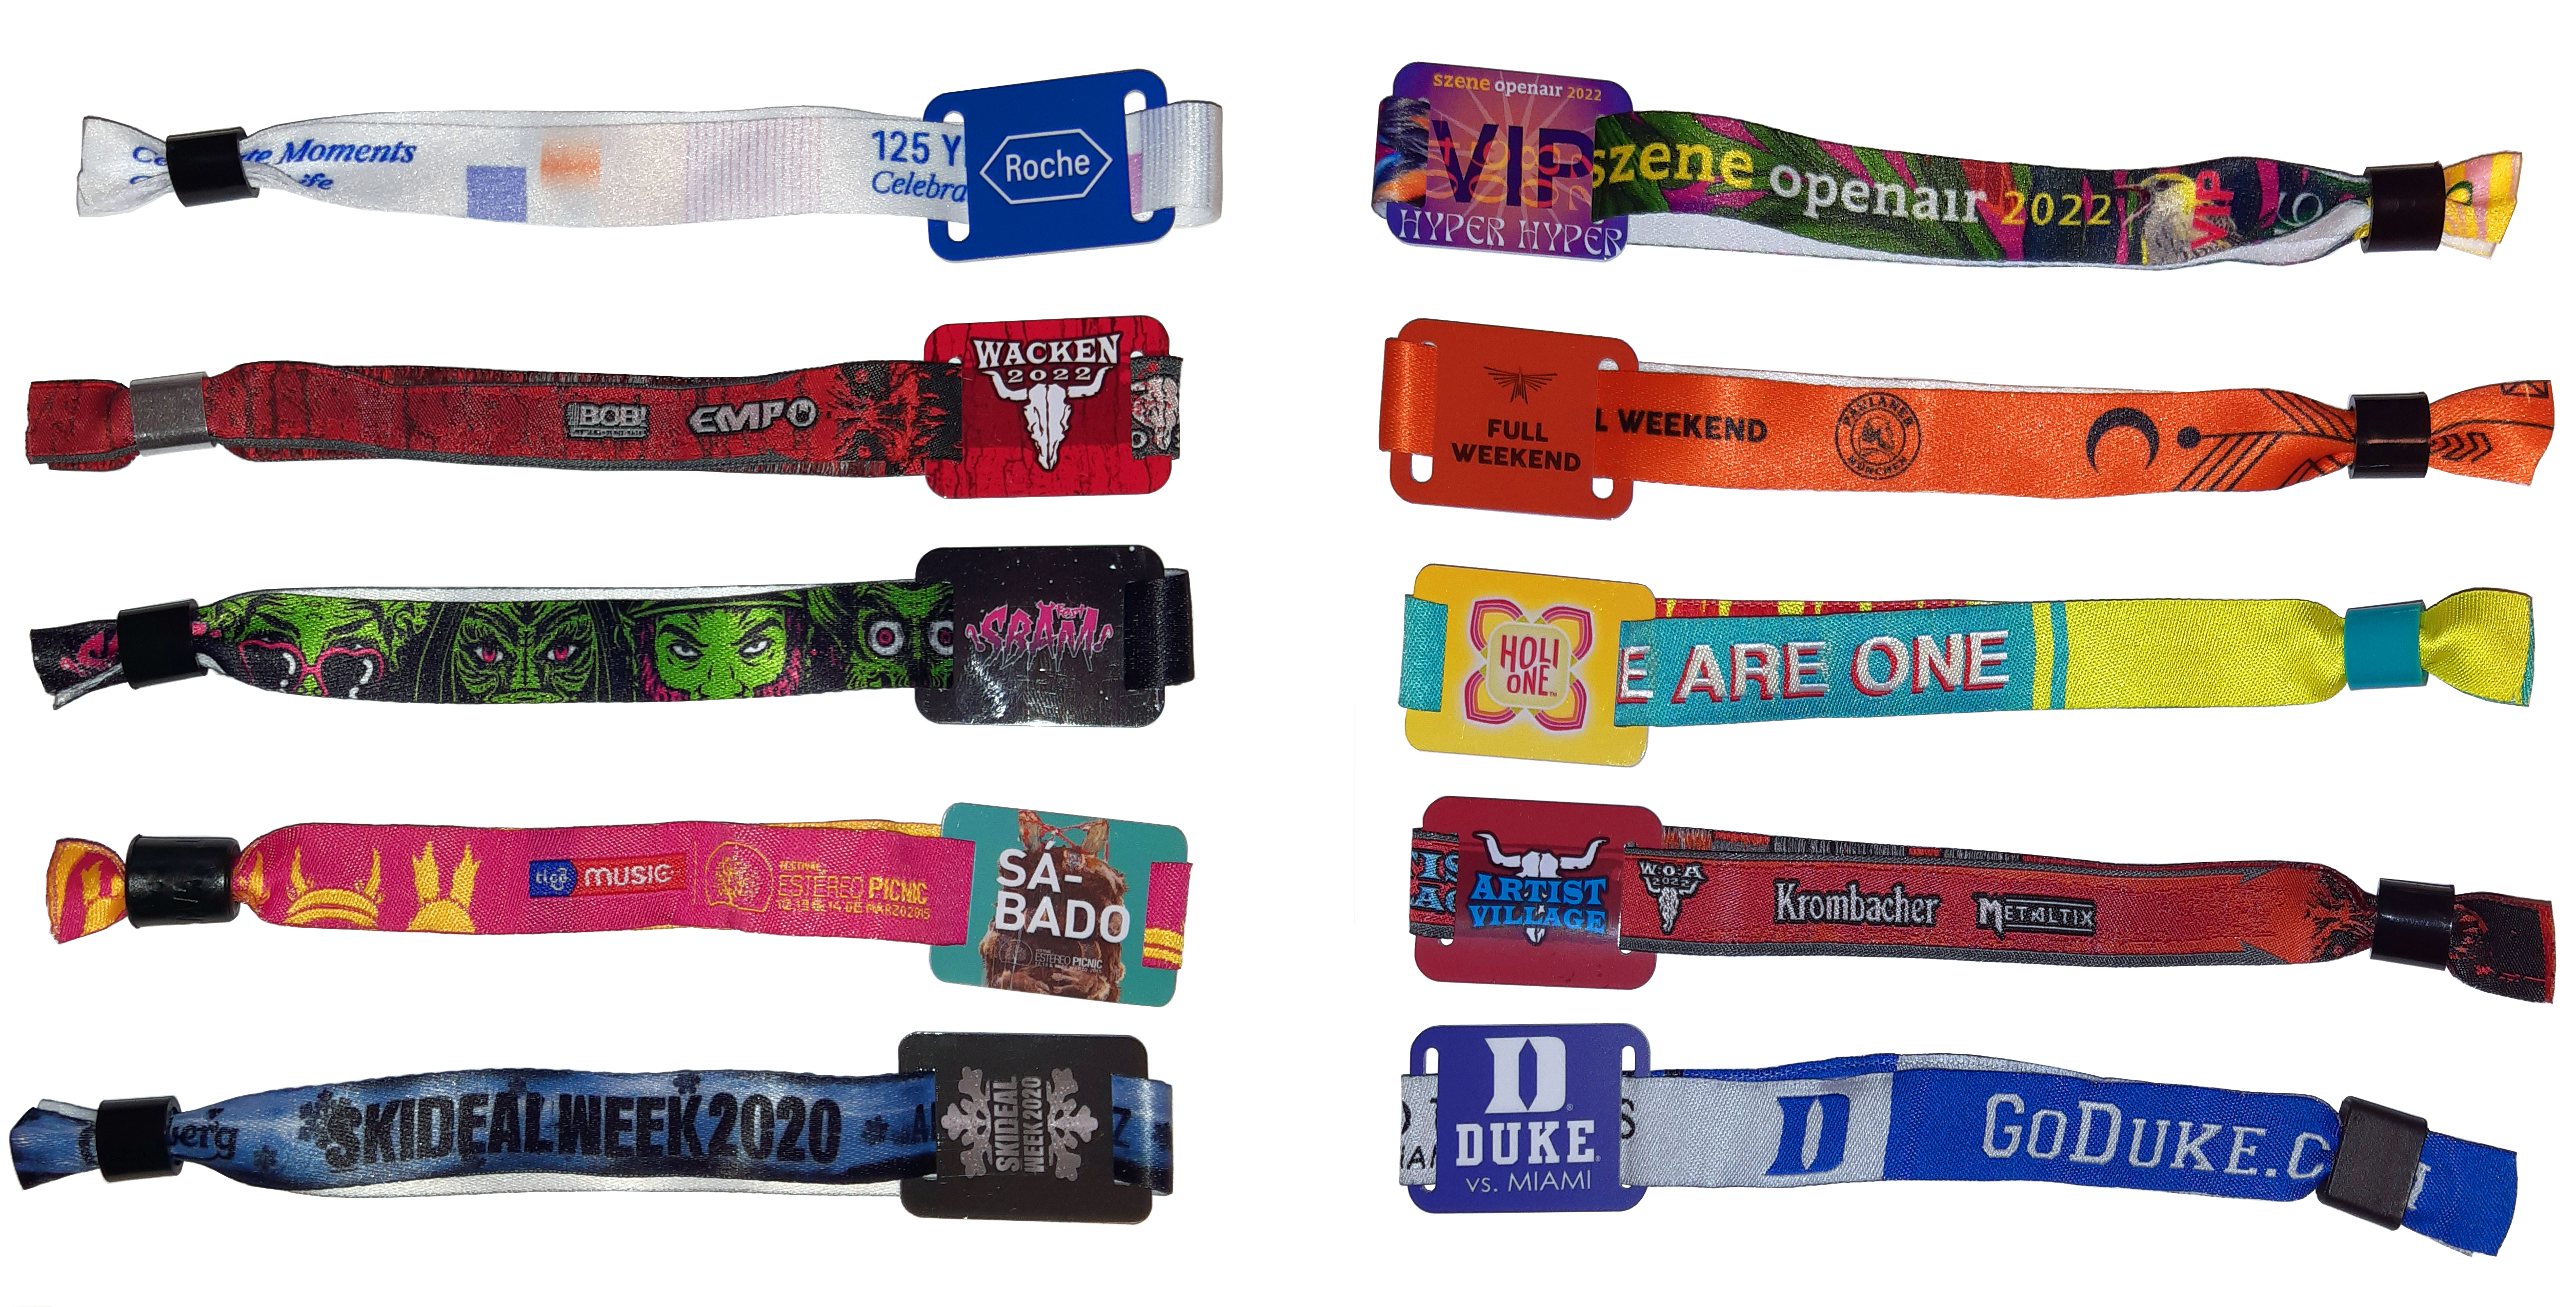 RFID tags NFC cashless payment wristbands bracelets armband festival chip chips